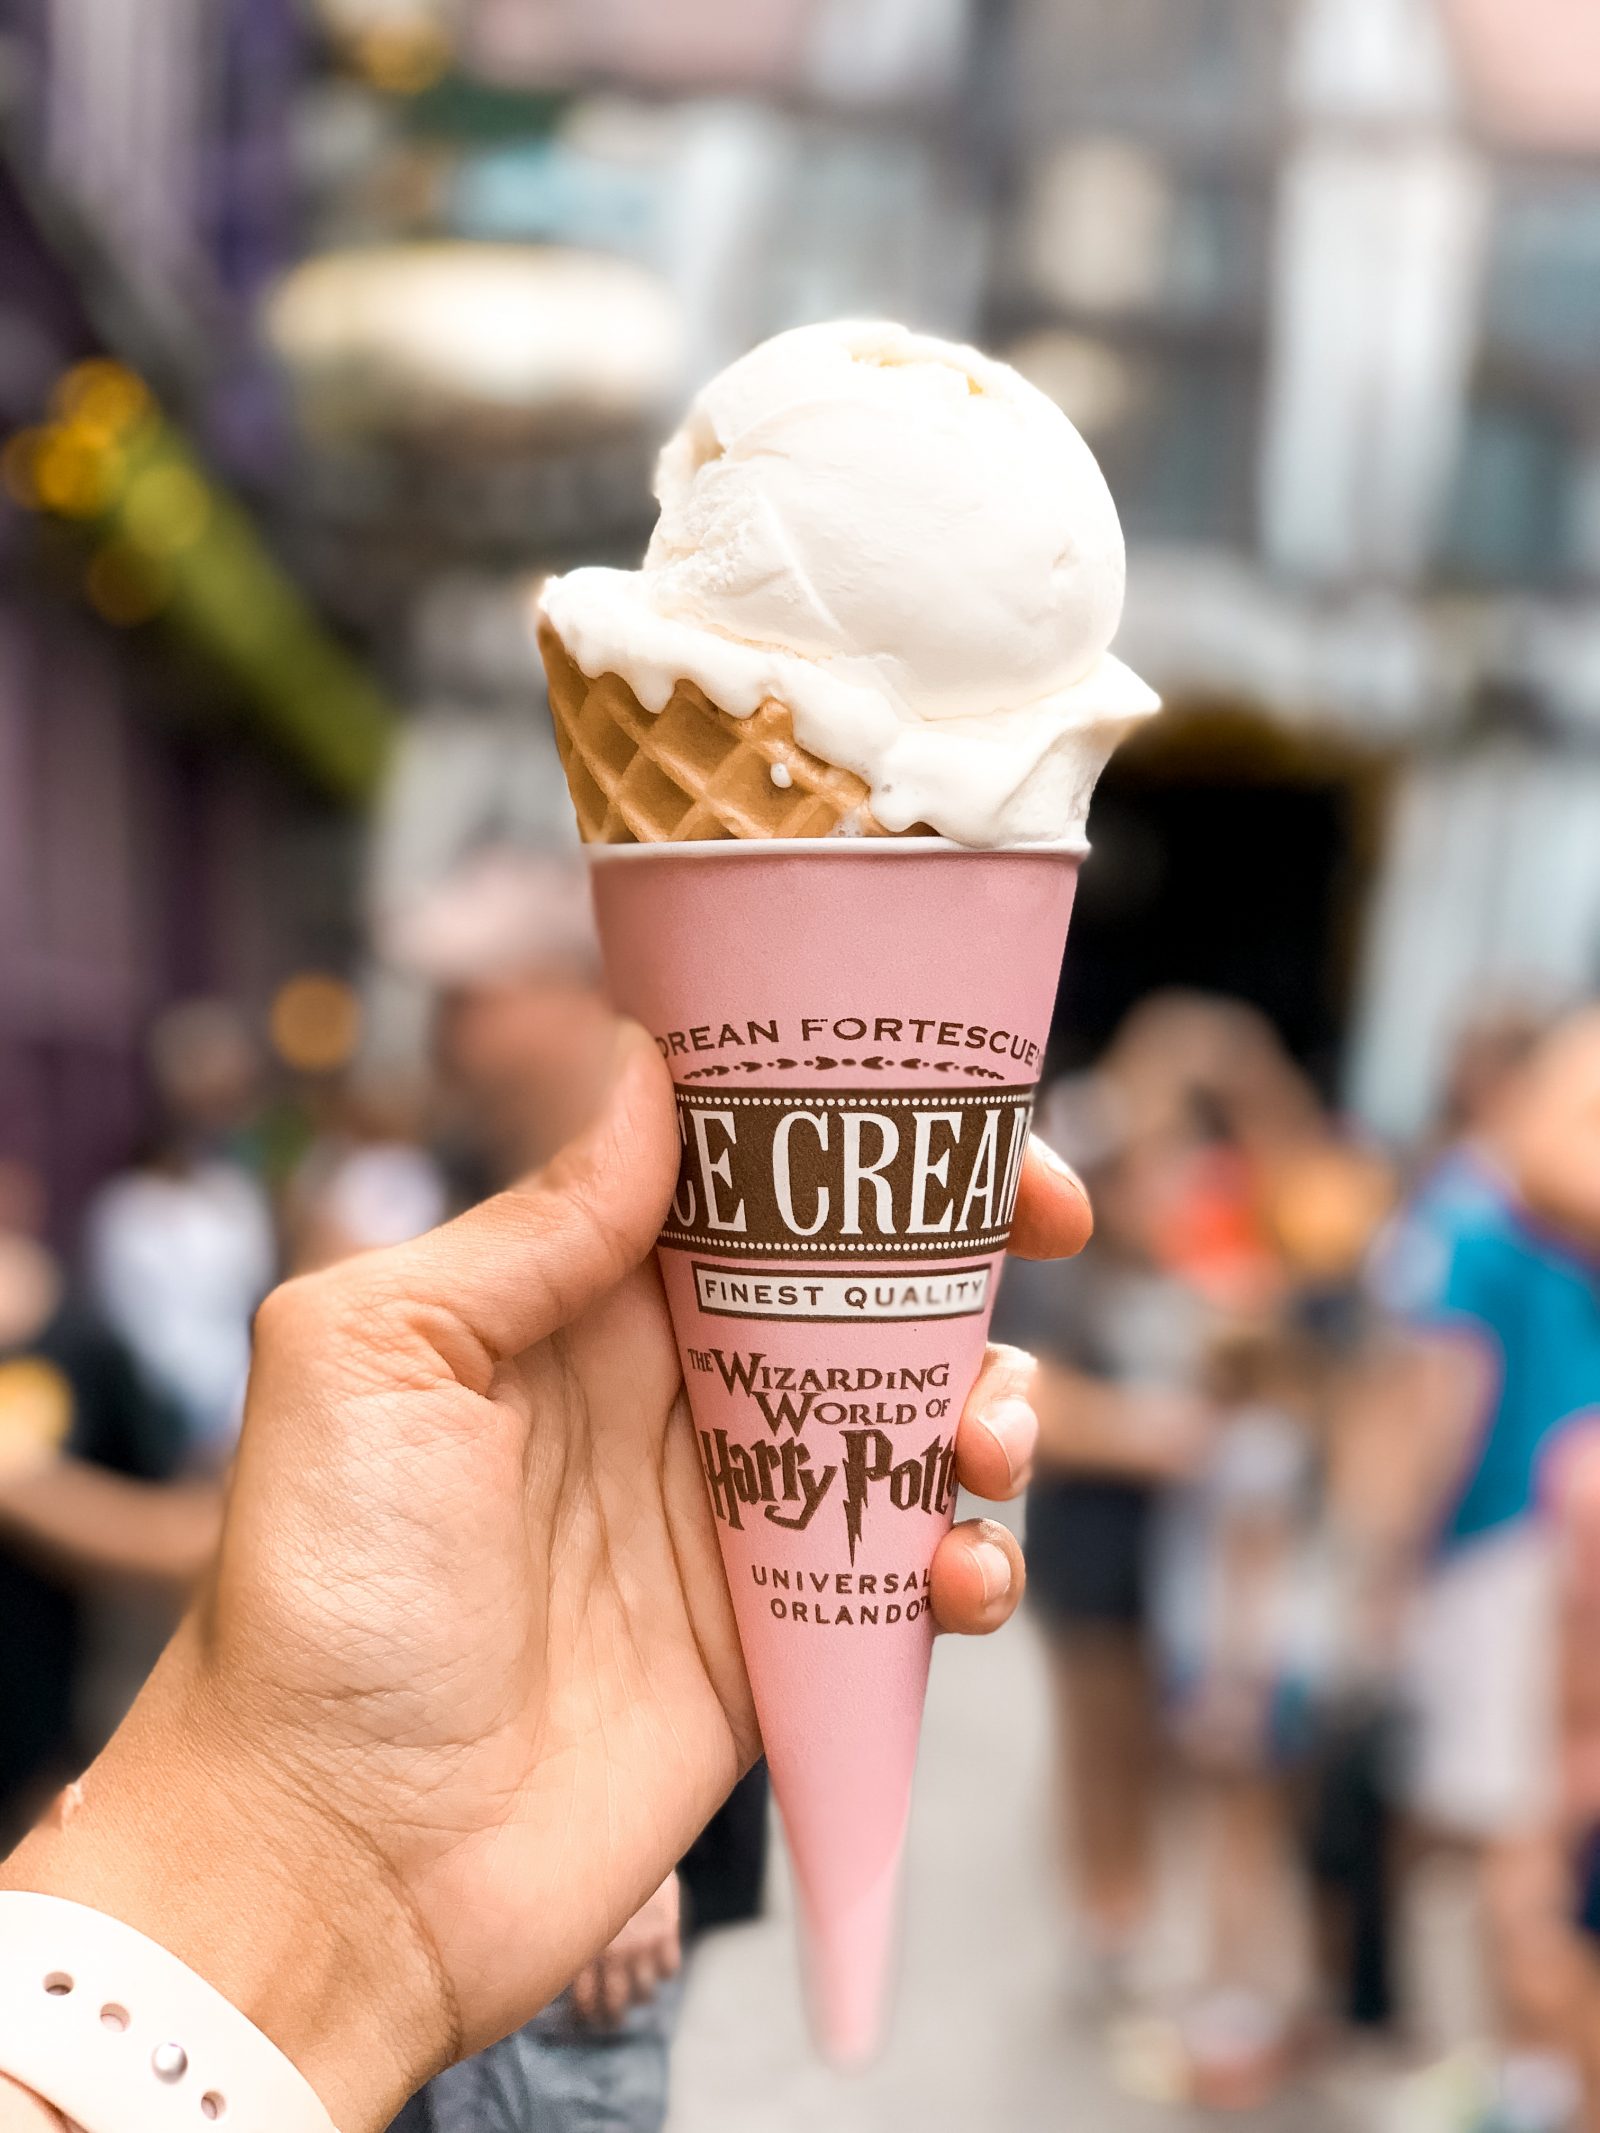 Florean Fortescue's ice cream at the Wizarding World of Harry Potter Universal Orlando